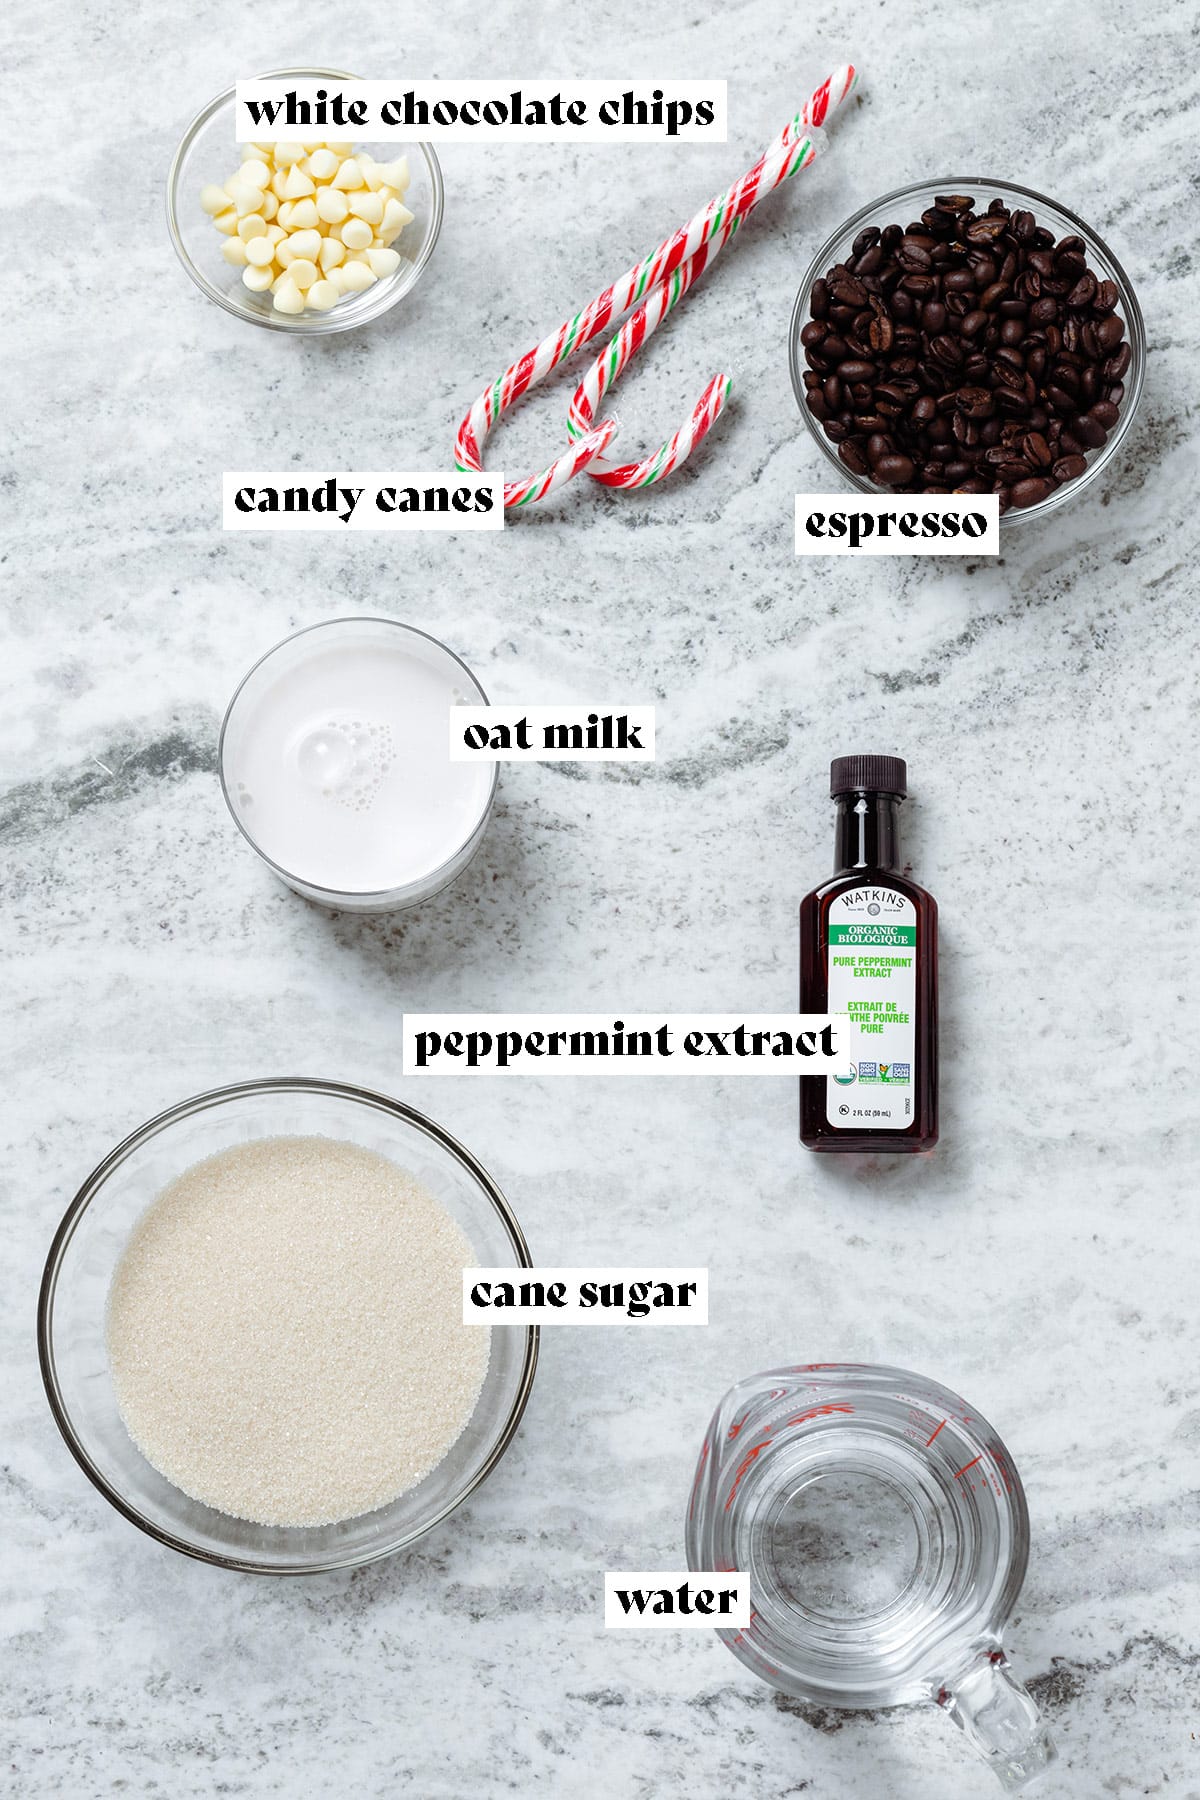 Coffee beans, peppermint extract, cane sugar, water, milk. and white chocolate chips all measured in bowls and laid out on a grey stone background with text overlay.